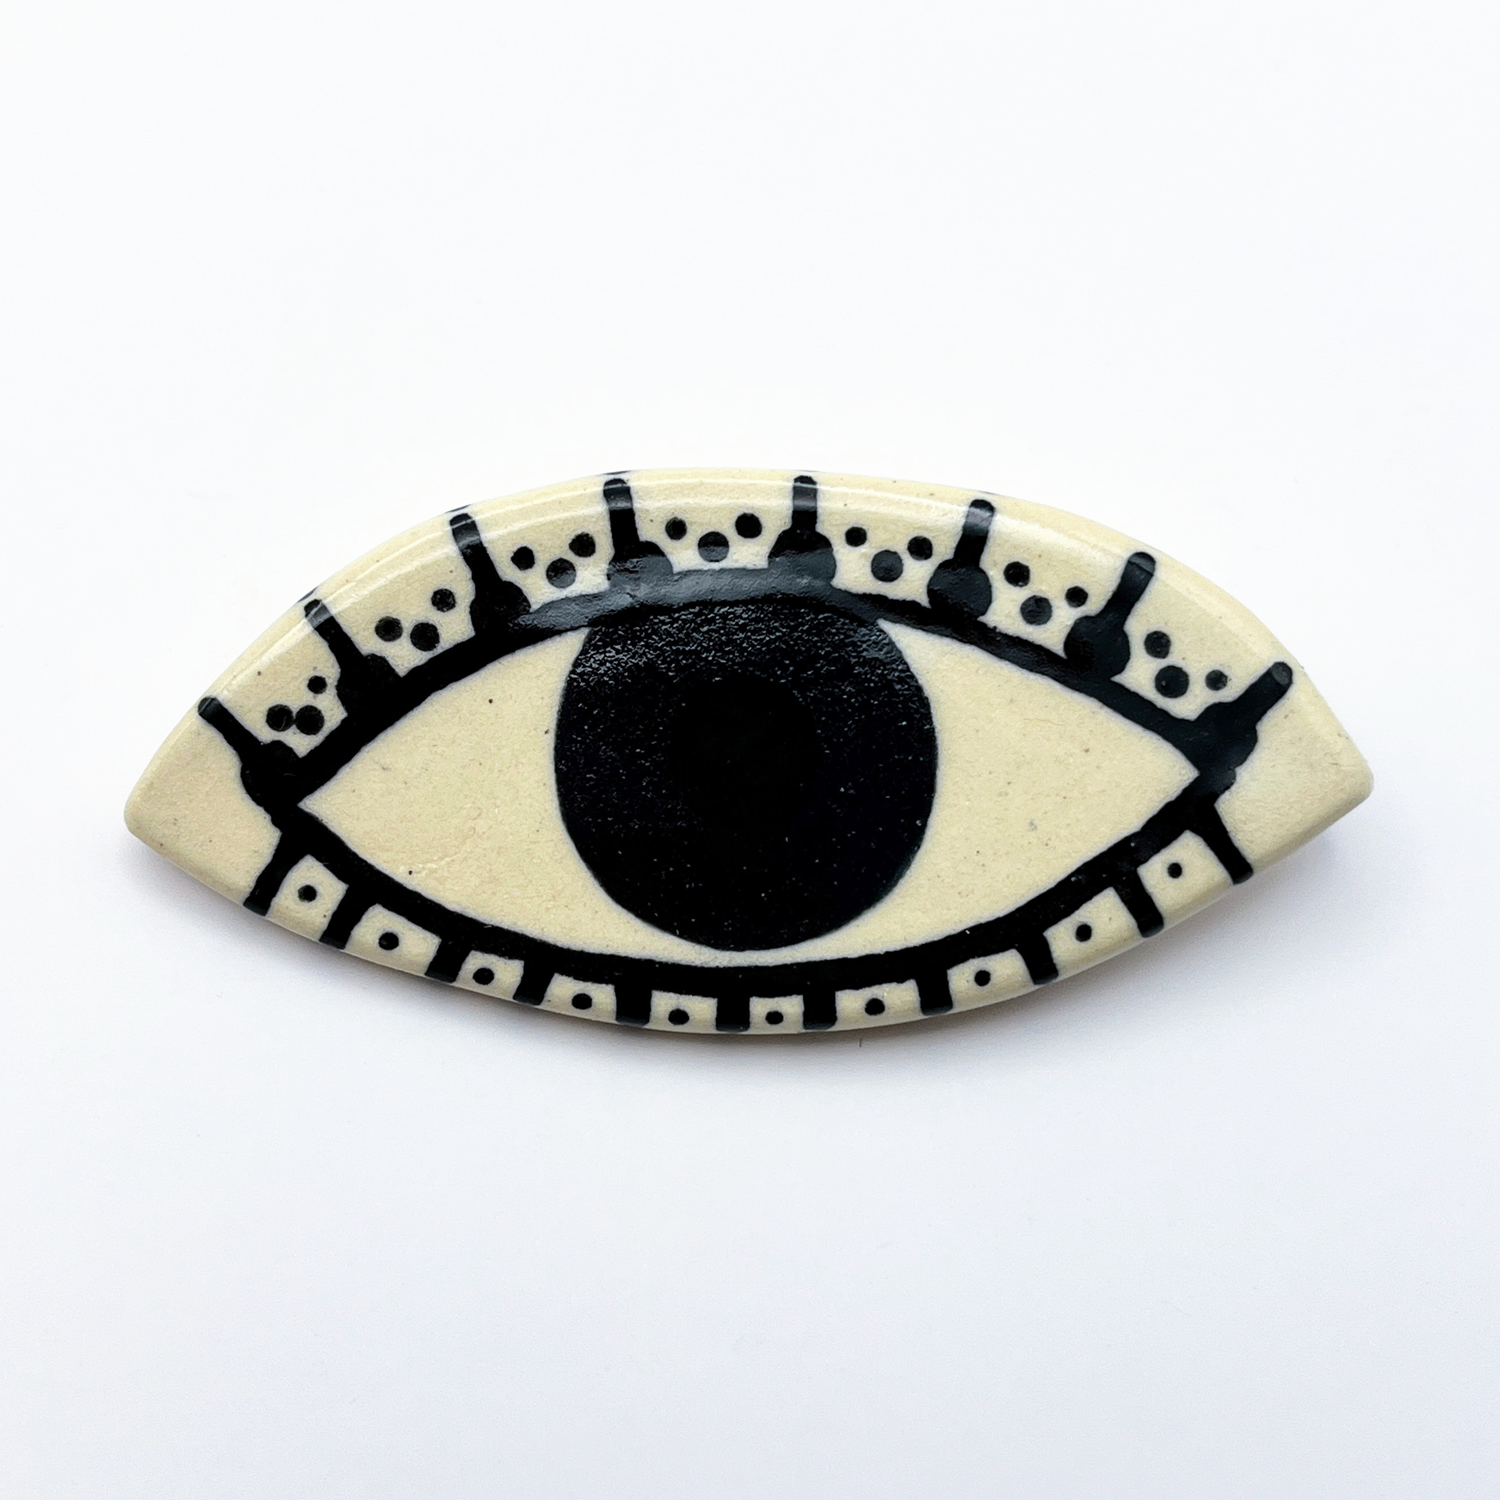 Here and Here: Green and Black Eye Brooch Product Image 1 of 2